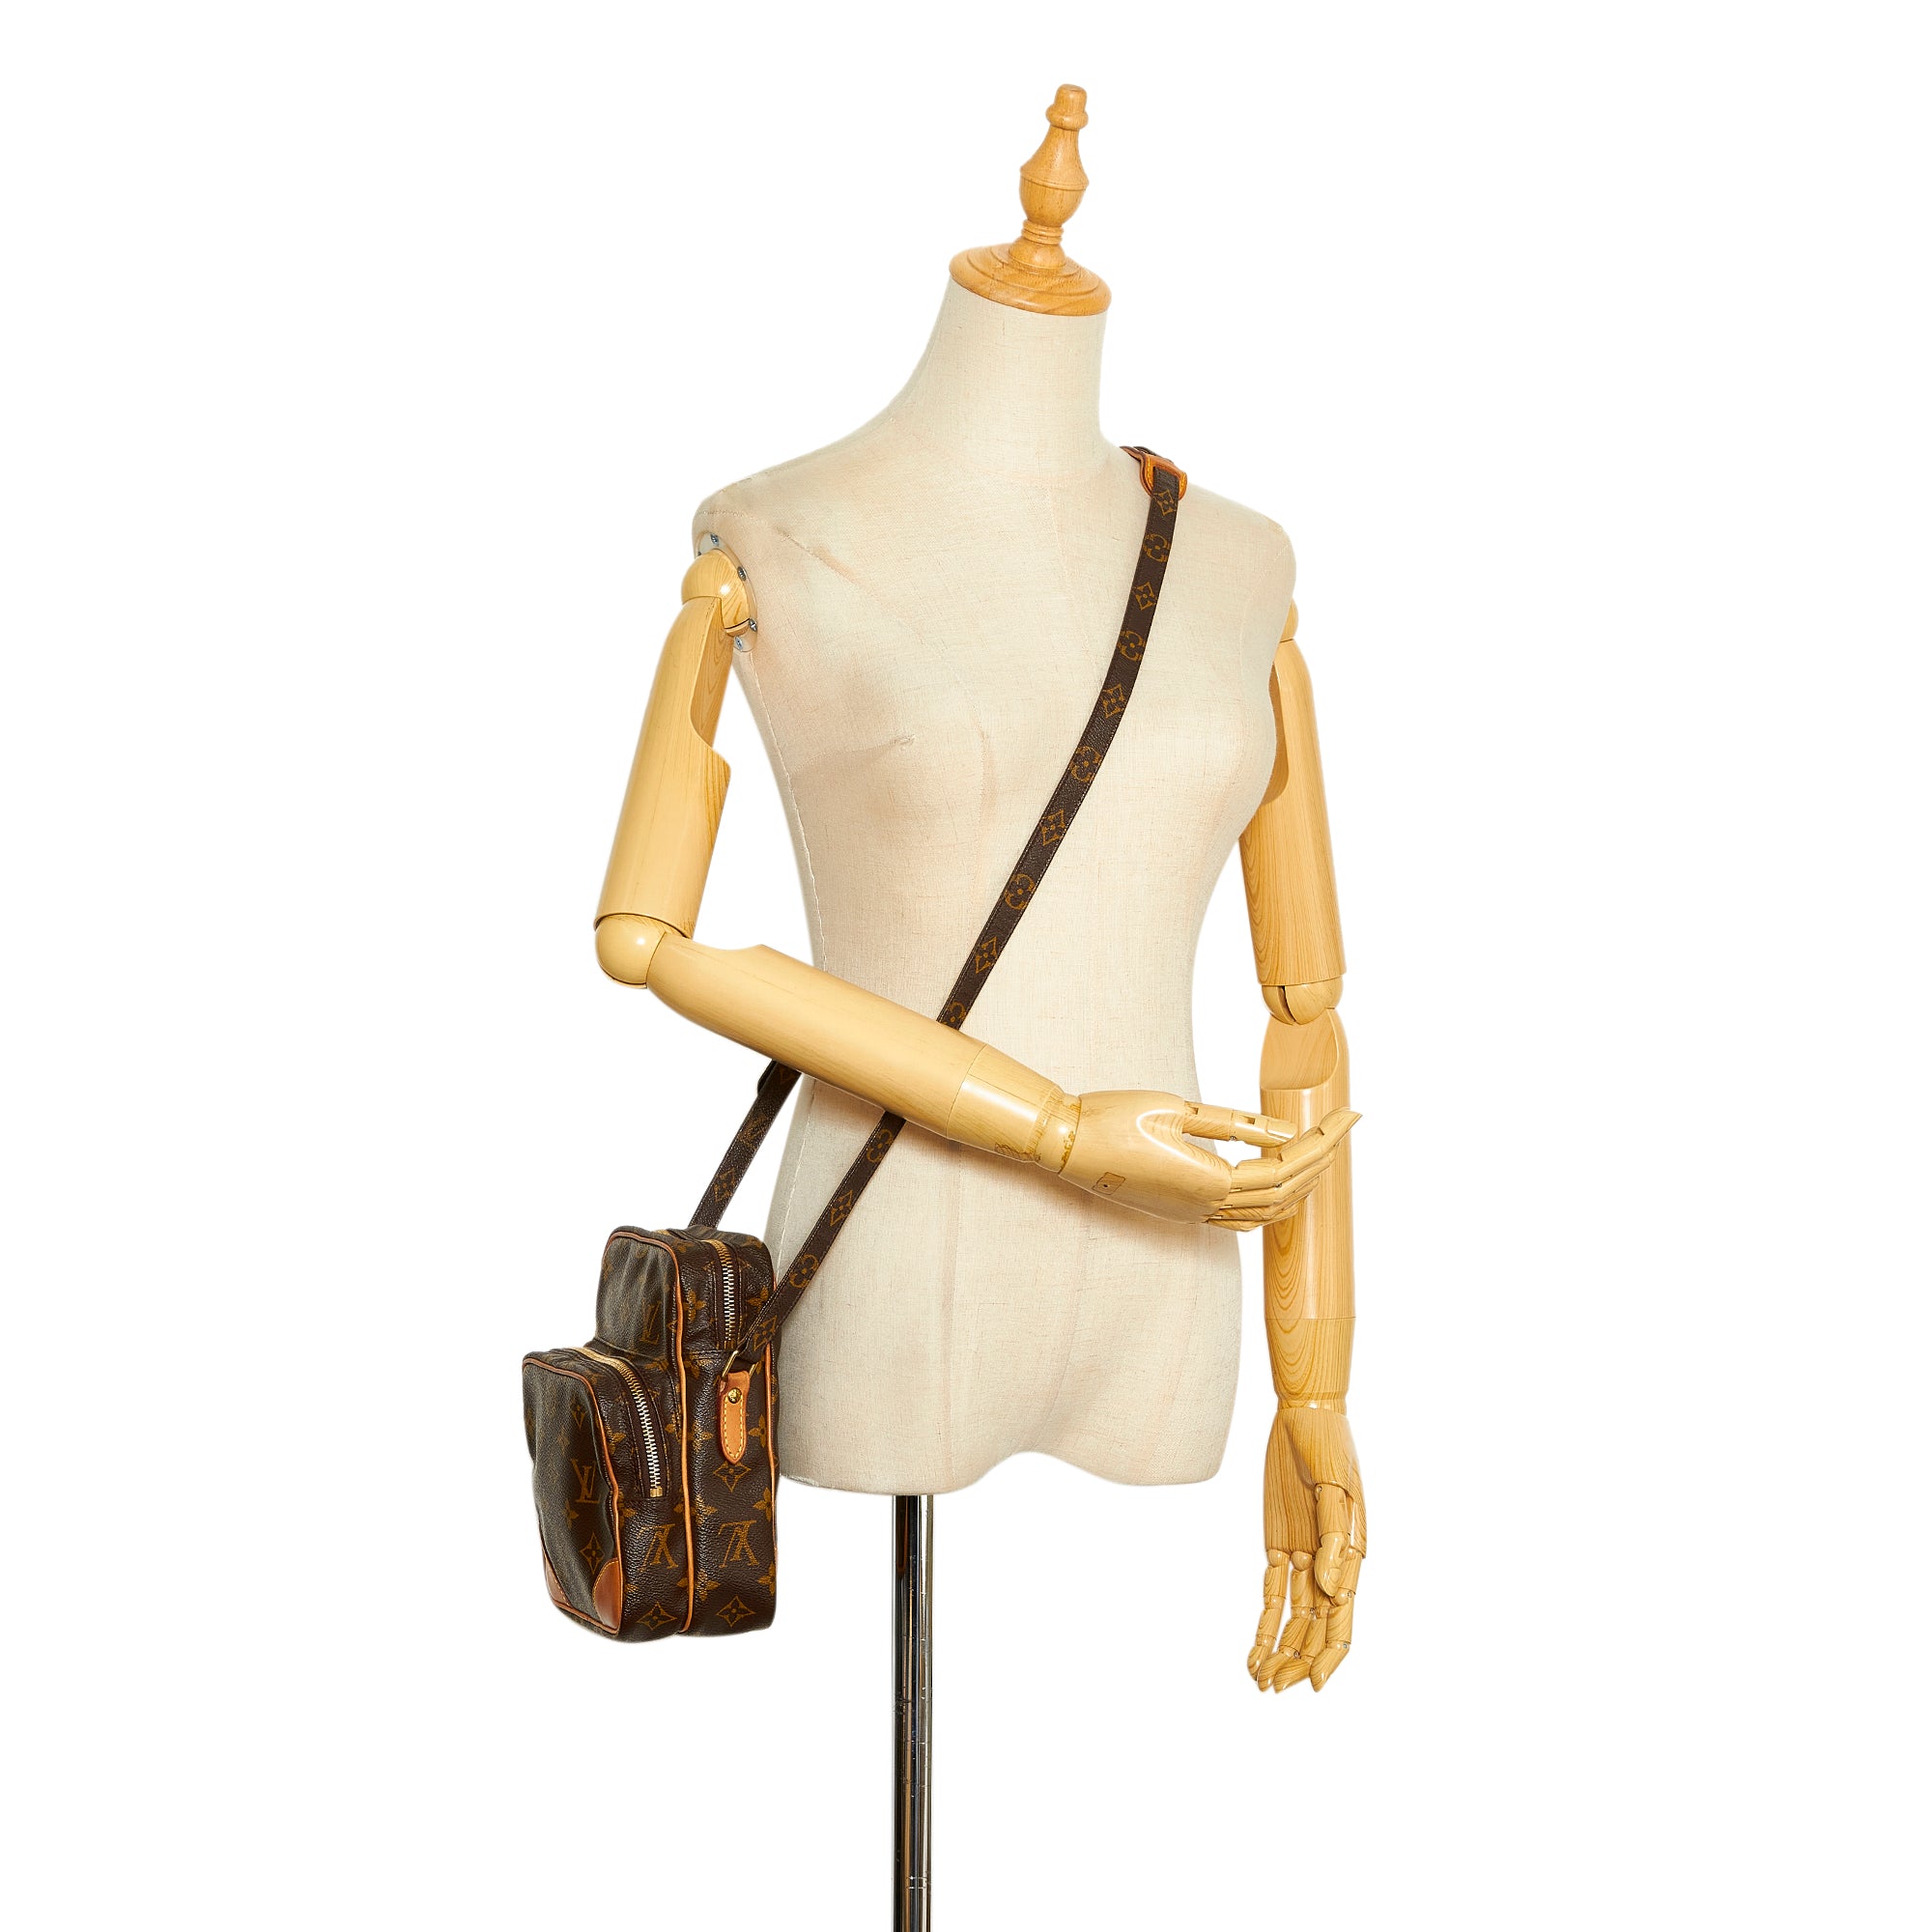 Danube patent leather crossbody bag Louis Vuitton Brown in Patent